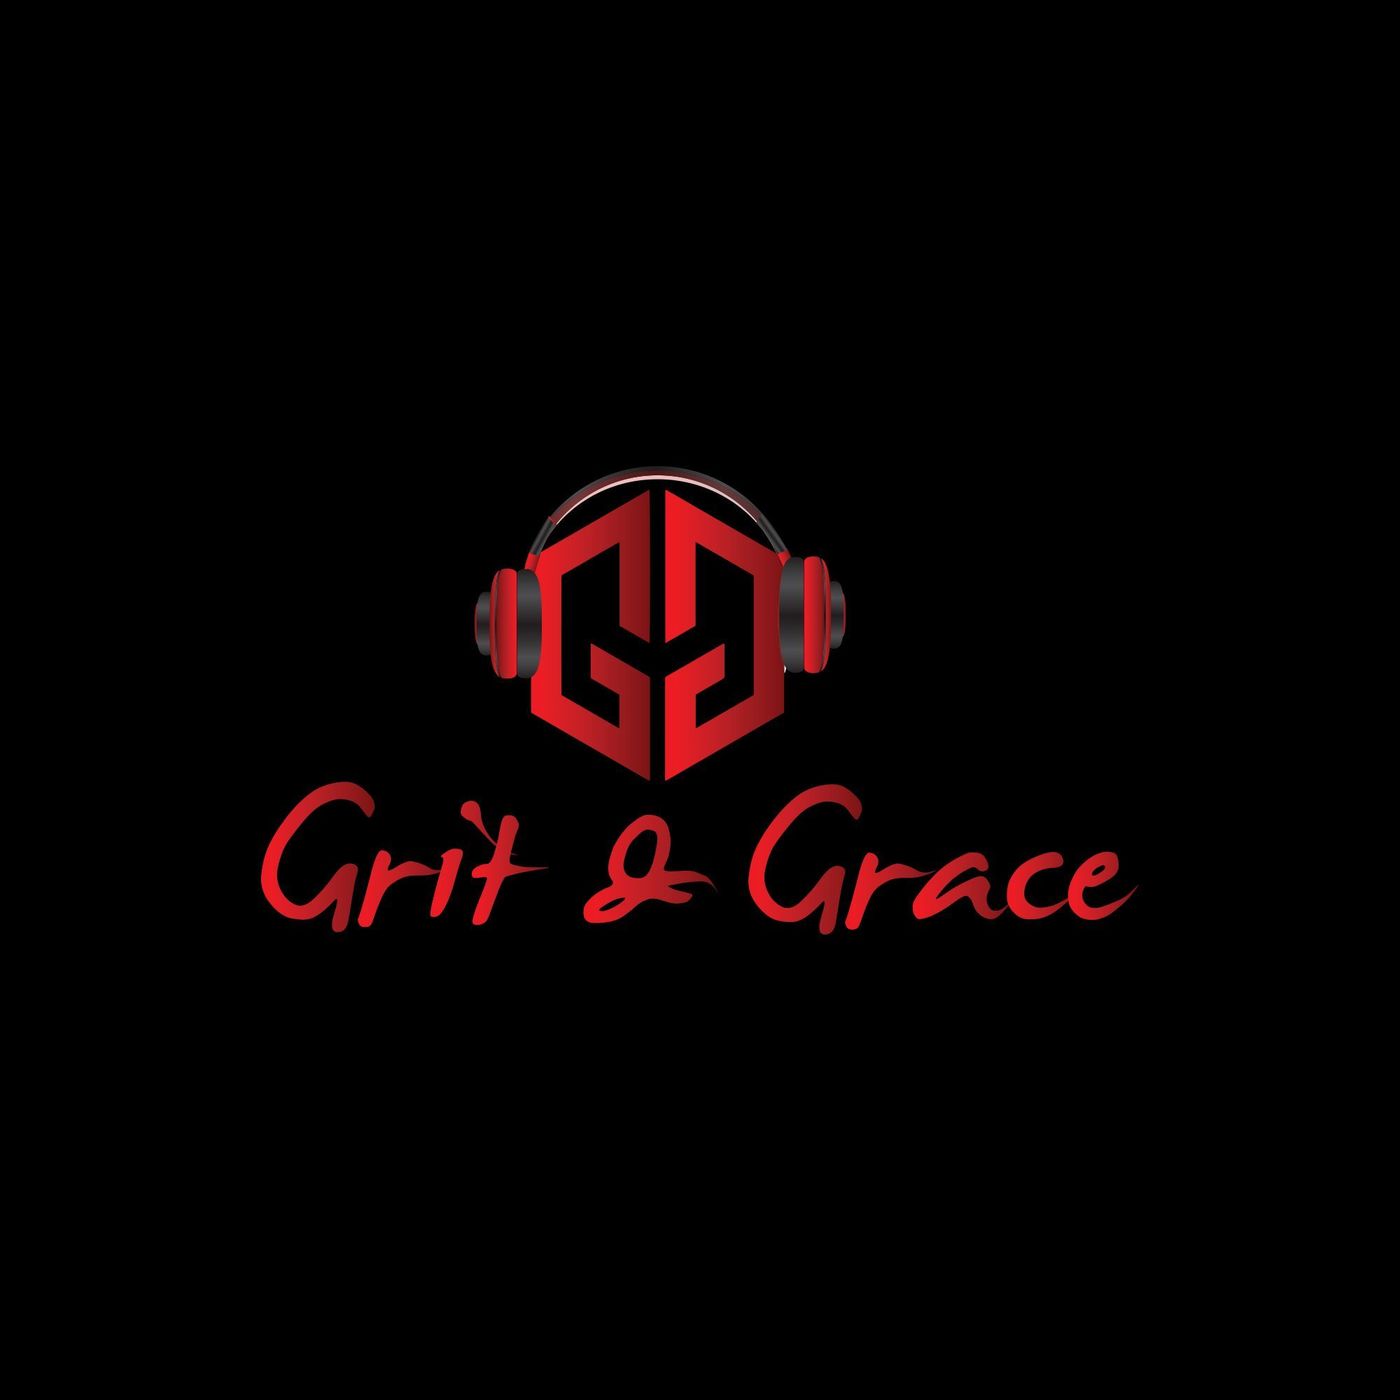 Grit and Grace:Tamara Banks and Using Your Voice to Shed Light